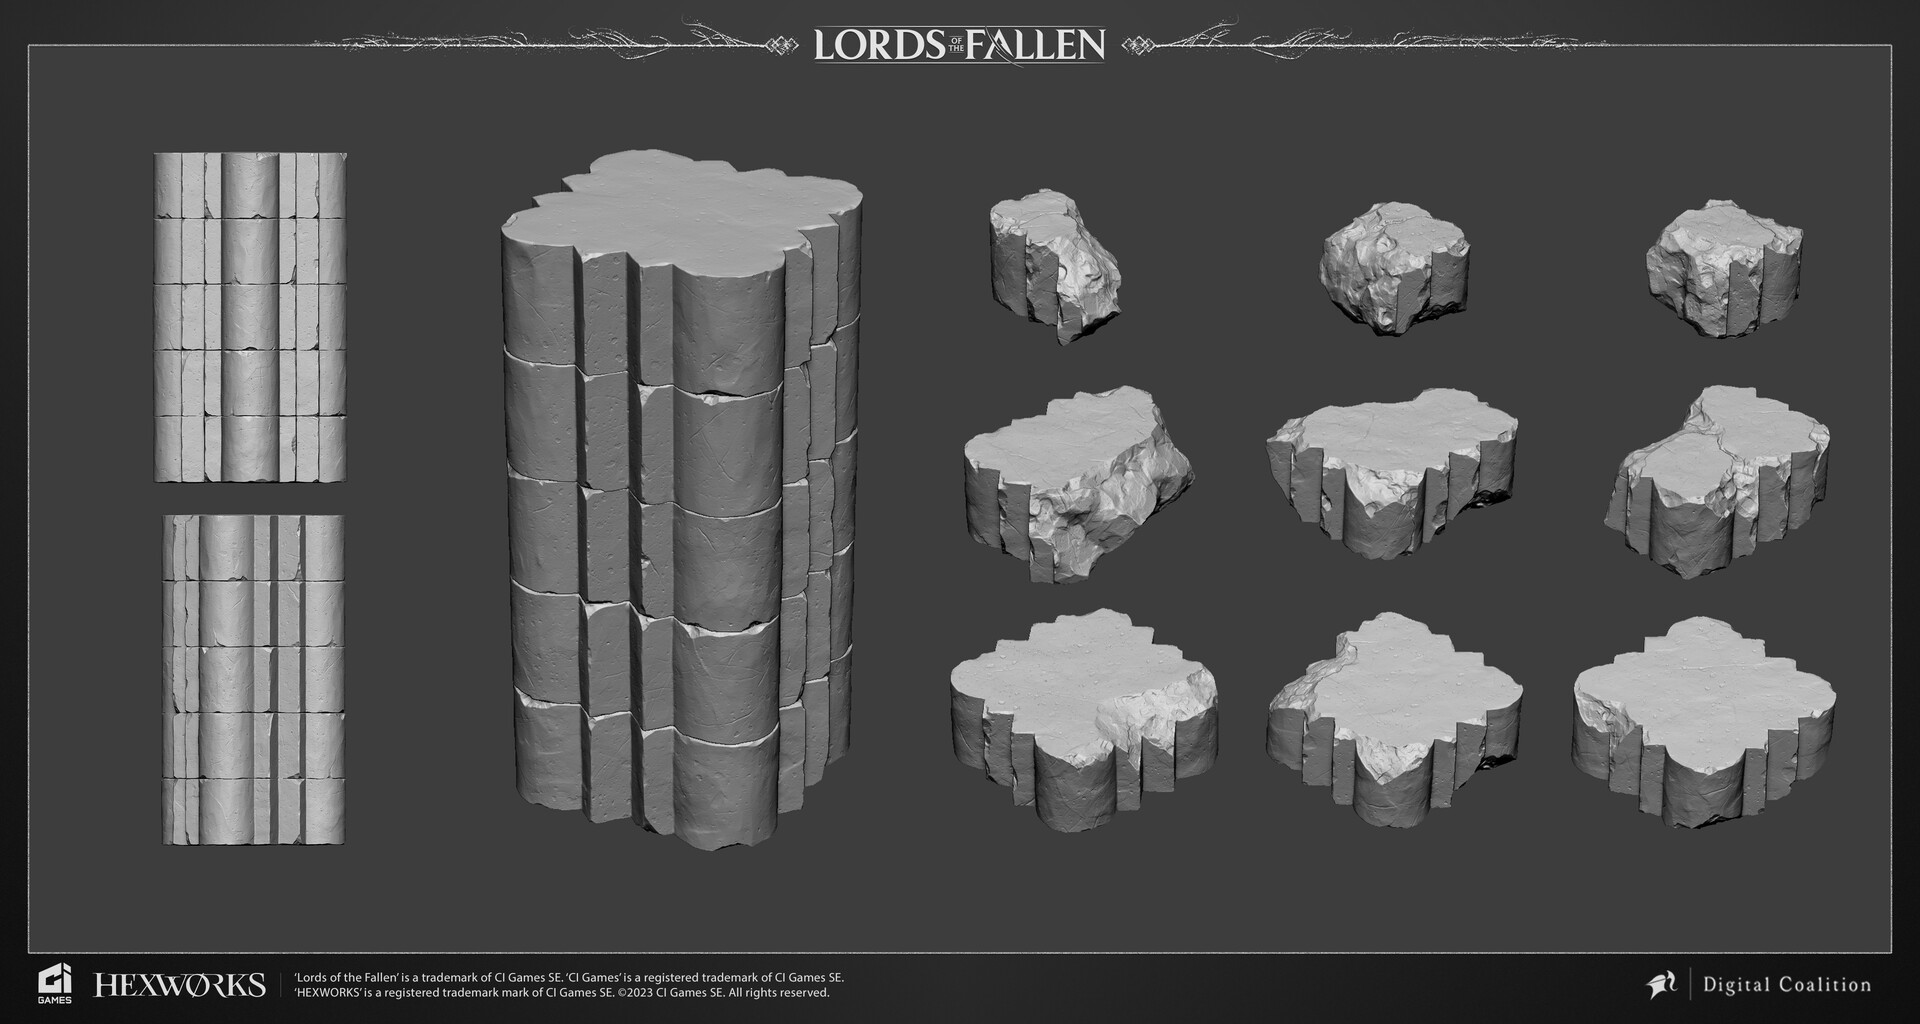 Hexworks is developing two expansions for Lords of the Fallen - Xfire